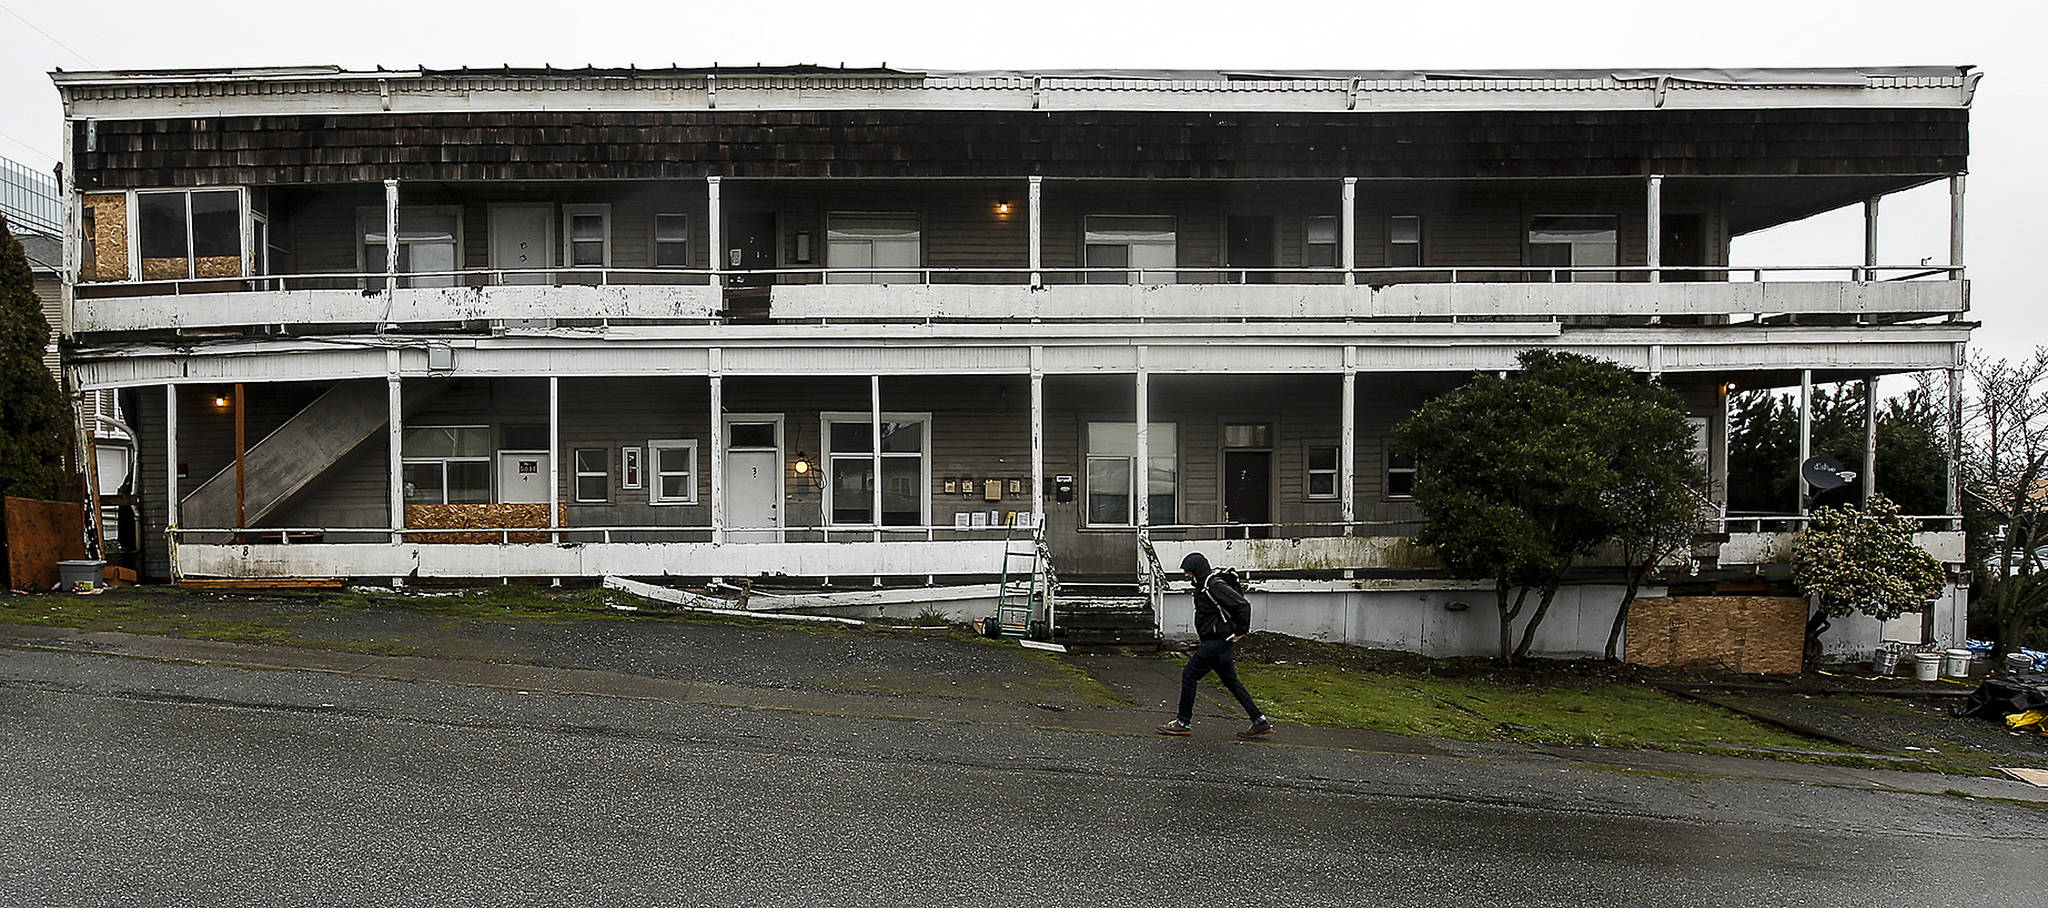 The Broadway Station Apartments are seen in Everett on Wednesday, Feb. 14. (Ian Terry / The Herald)